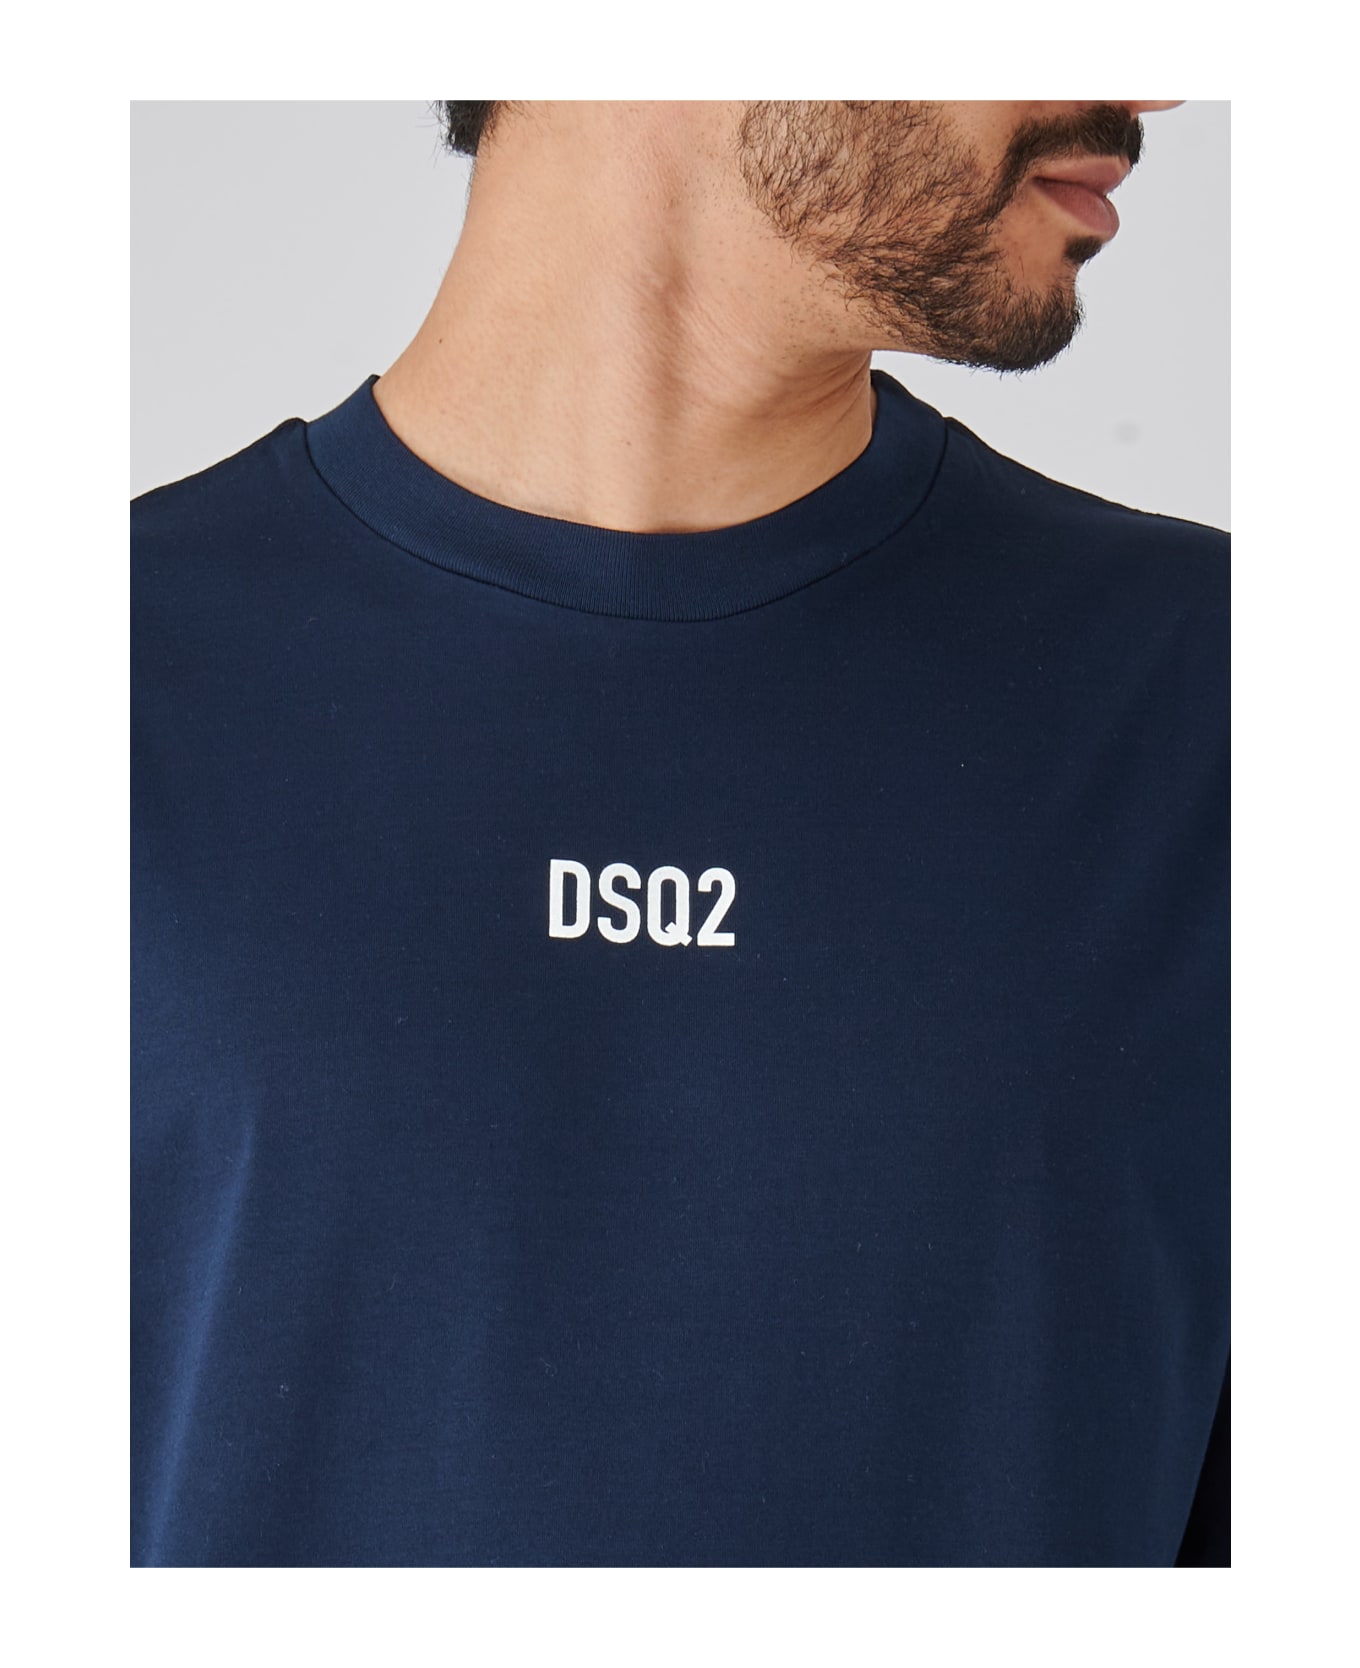 Dsquared2 Loose Fit Tee T-shirt - NAVY